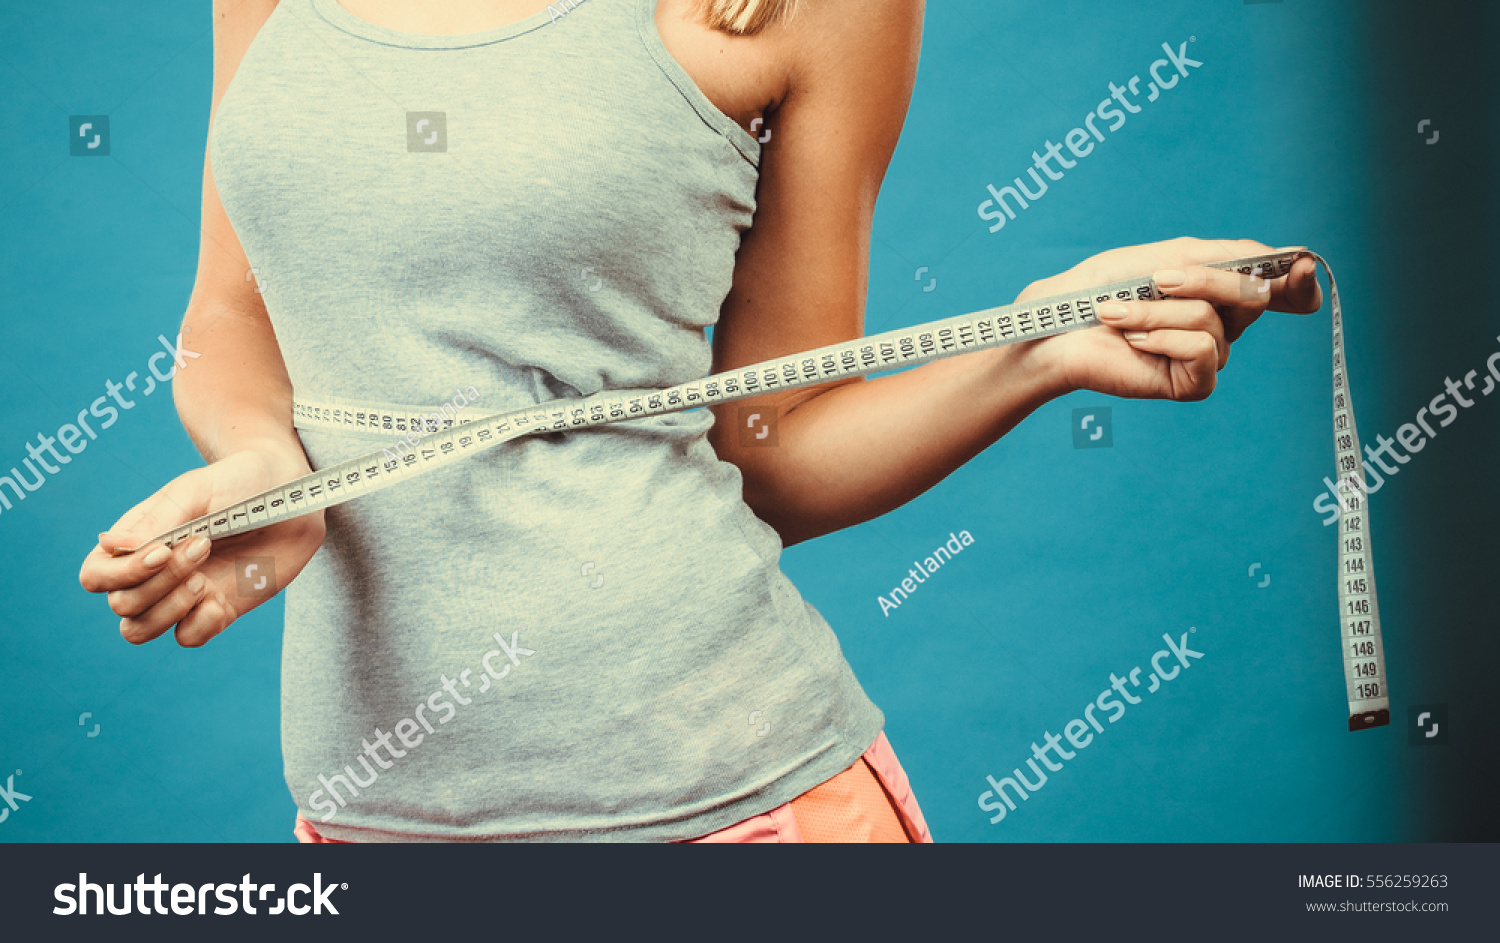 Weight loss, slim body, healthy lifestyle concept. Fit fitness girl measuring her waistline with measure tape on blue #556259263